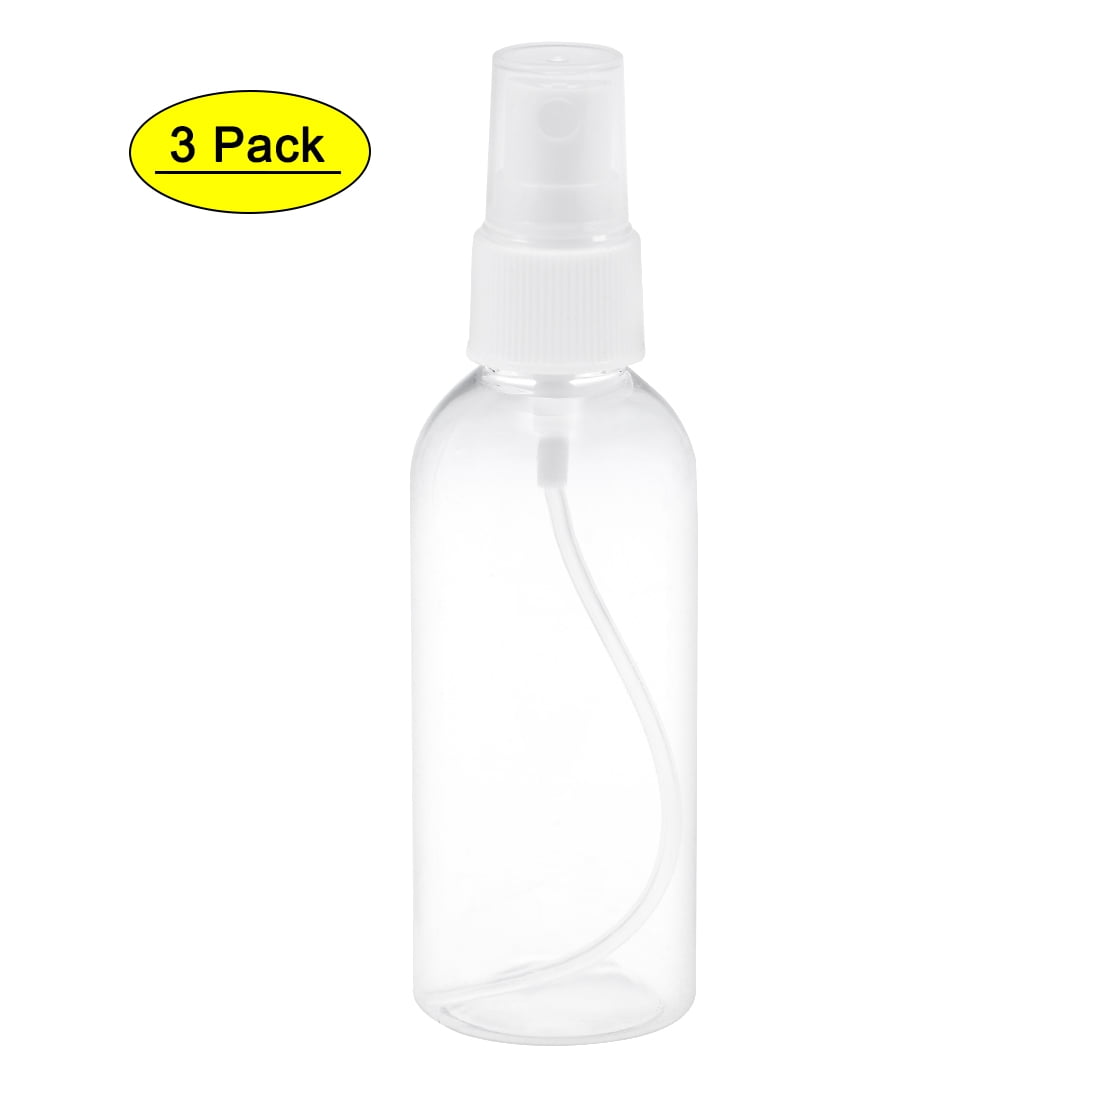  EZPRO USA Transparent Empty Spray Bottles 32 oz 4 Pack, Industrial  Sprayer, Heavy-Duty Spray for Hair, Pet Grooming Cat Training, Auto Car  Detailing, Cleaning Janitorial